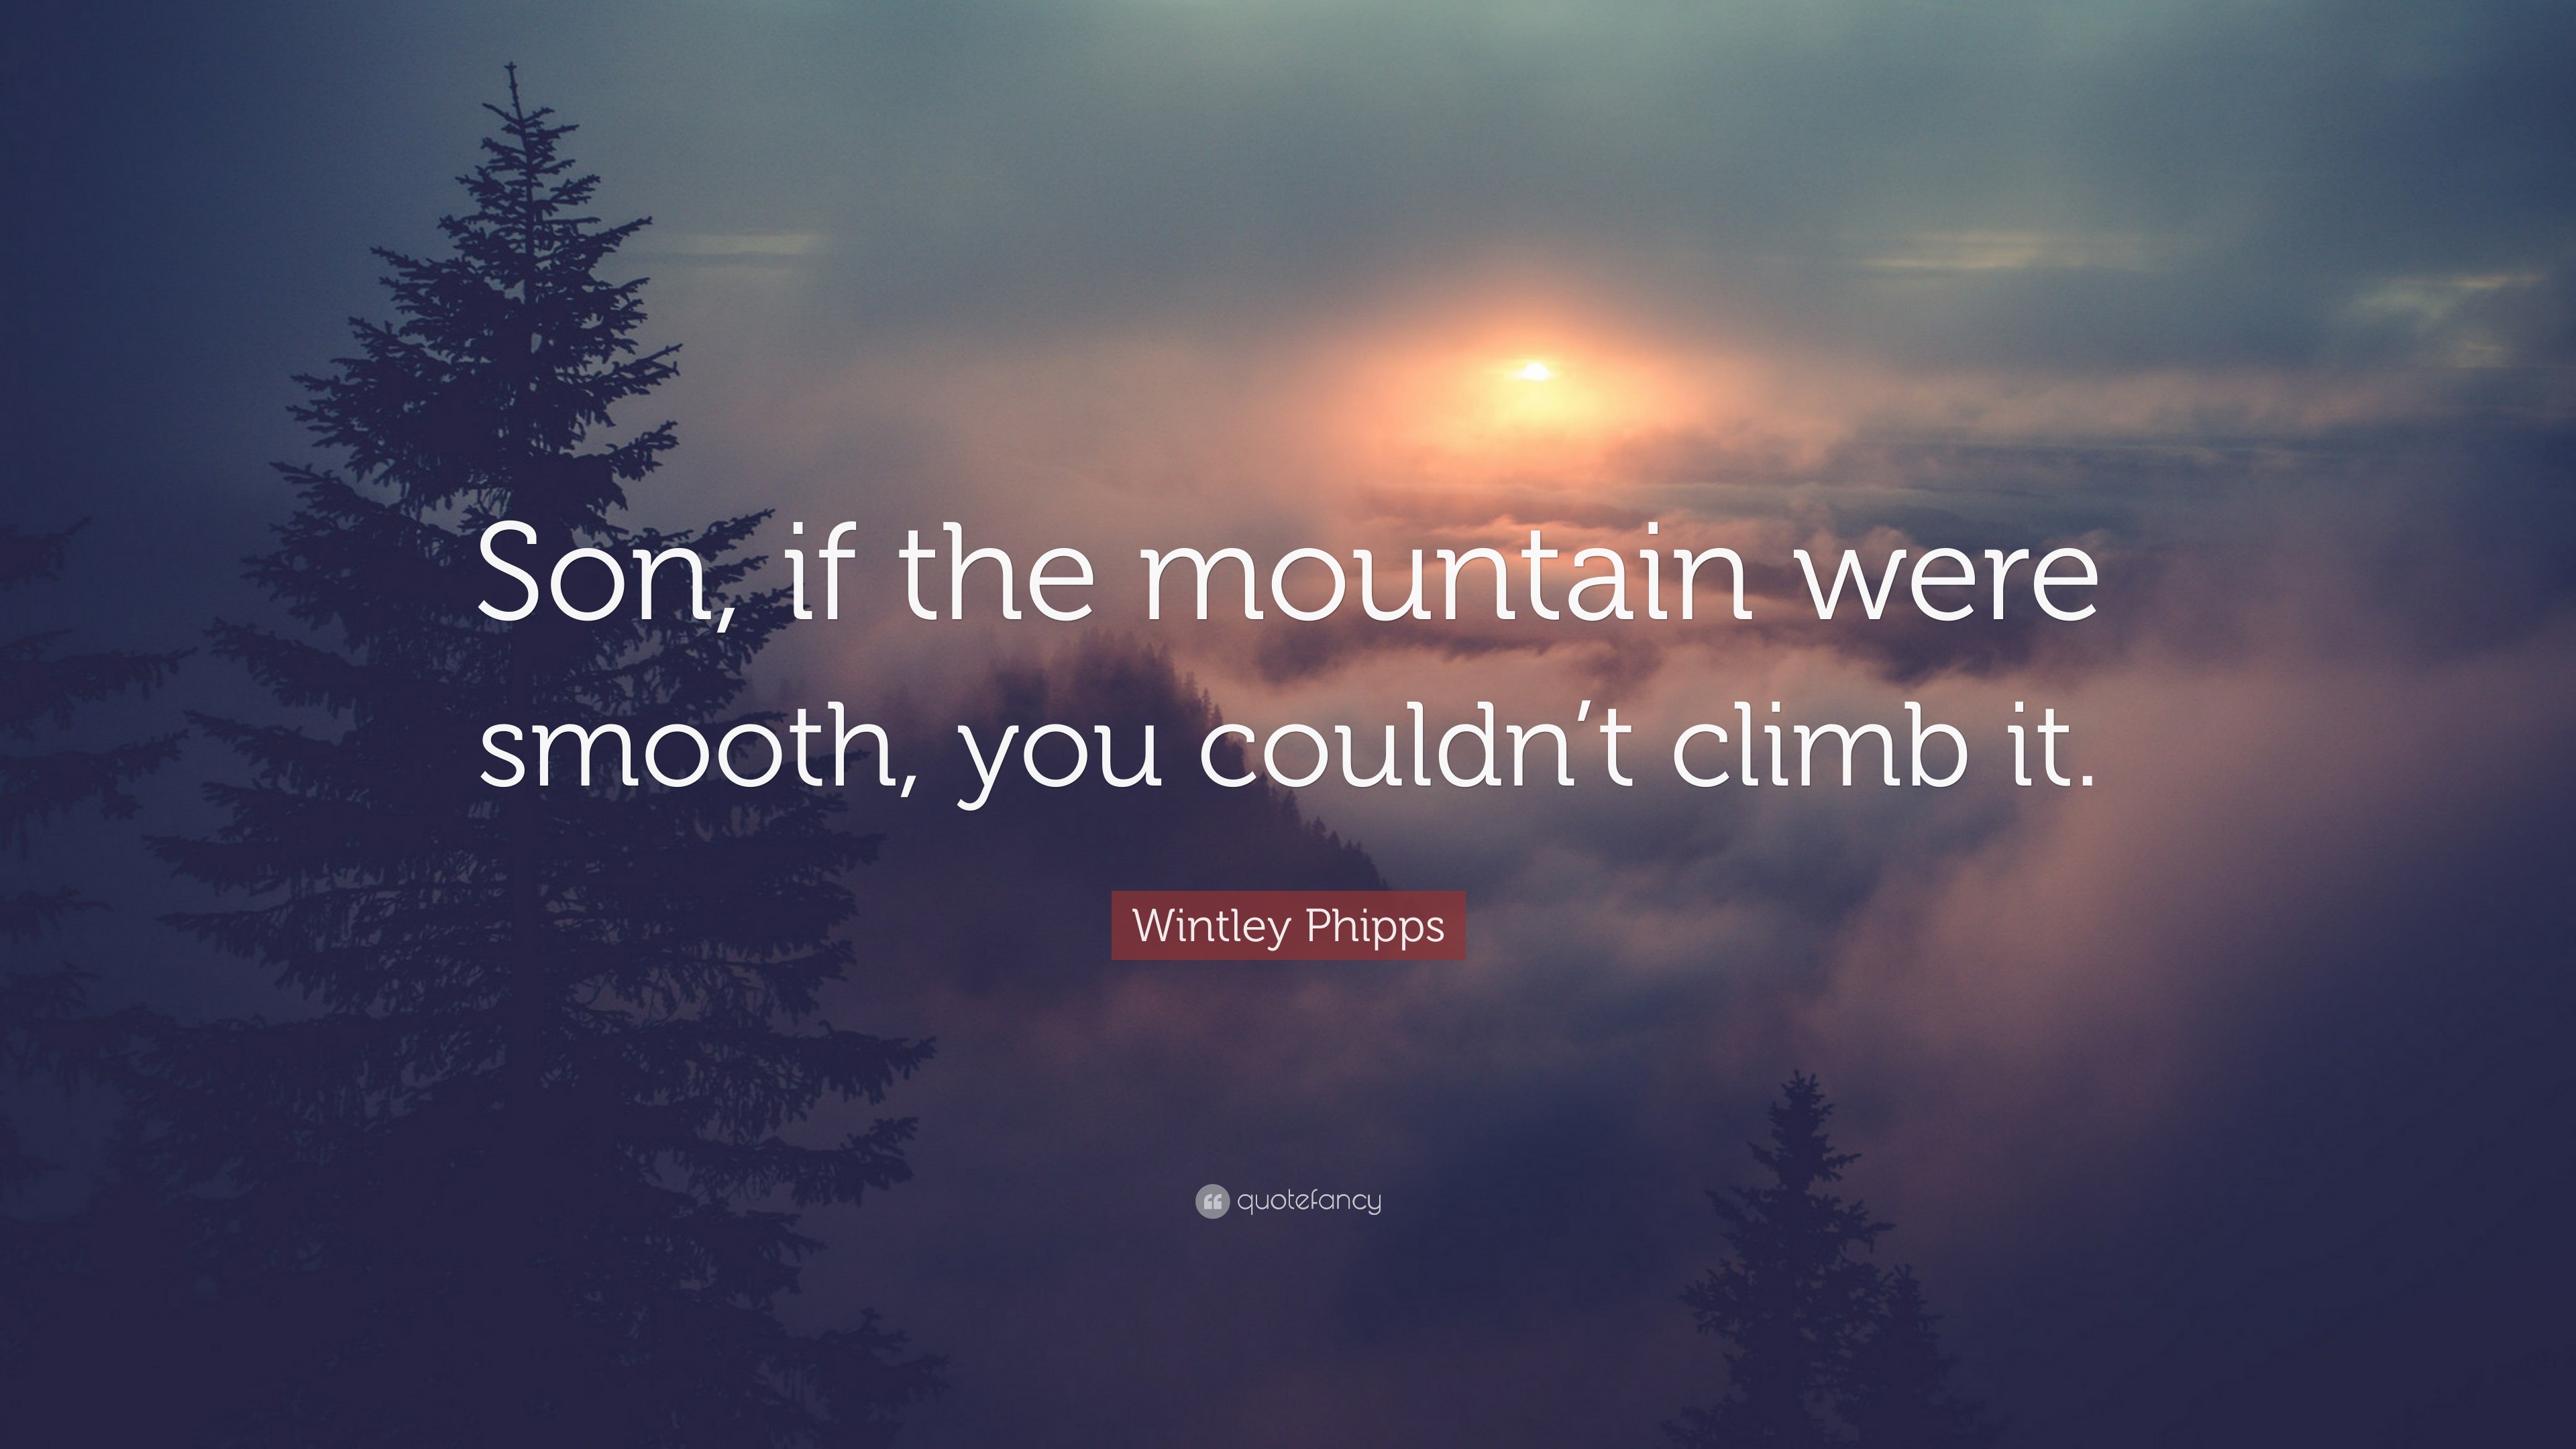 Wintley Phipps Quote: “Son, if the mountain were smooth, you